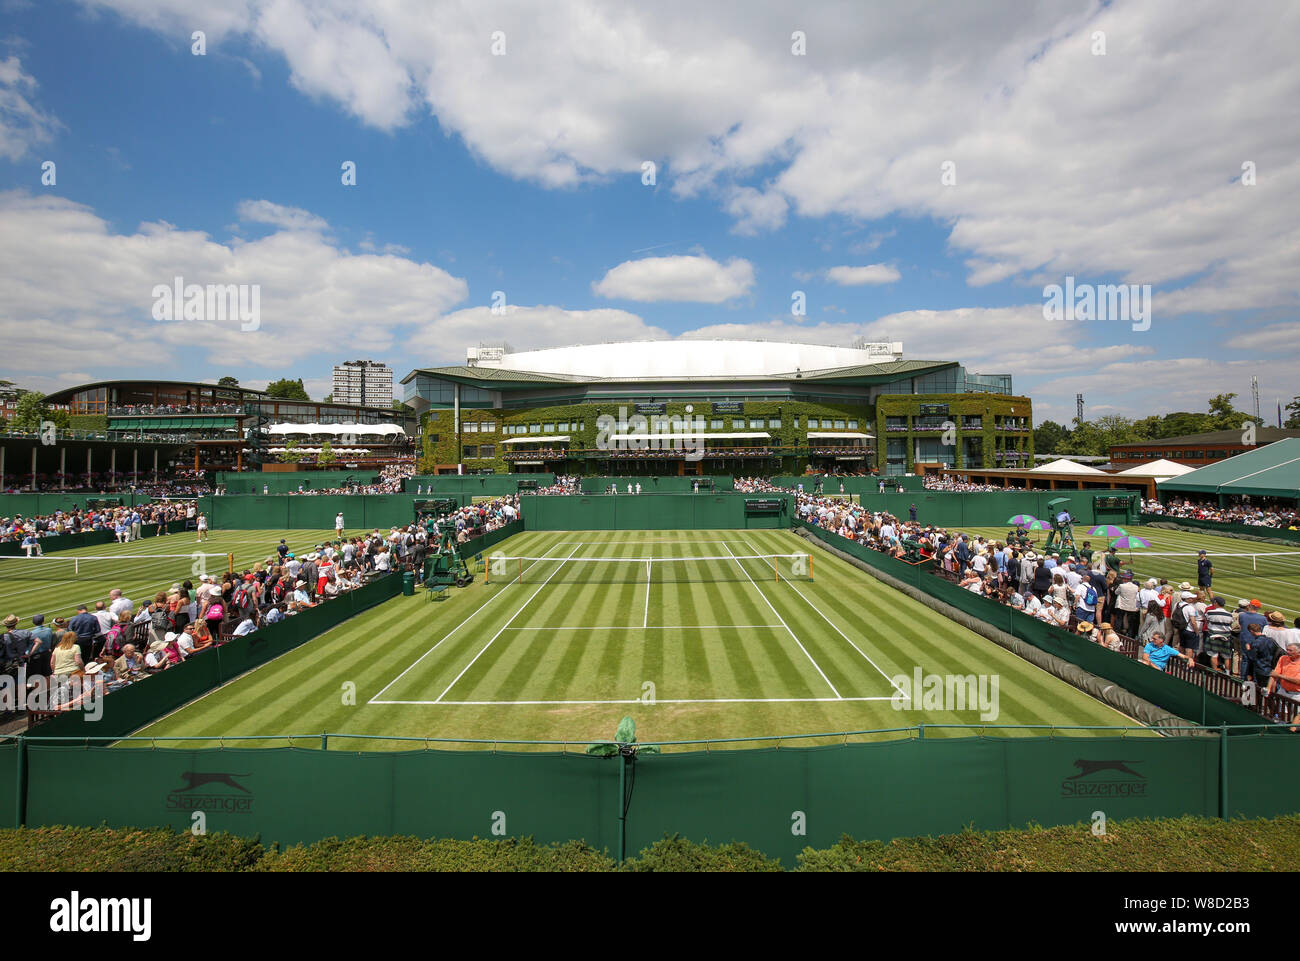 Panoramic view of outside courts with Centre Court building in the background, 2019 Wimbledon Championships, London, England, United Kingdom Stock Photo